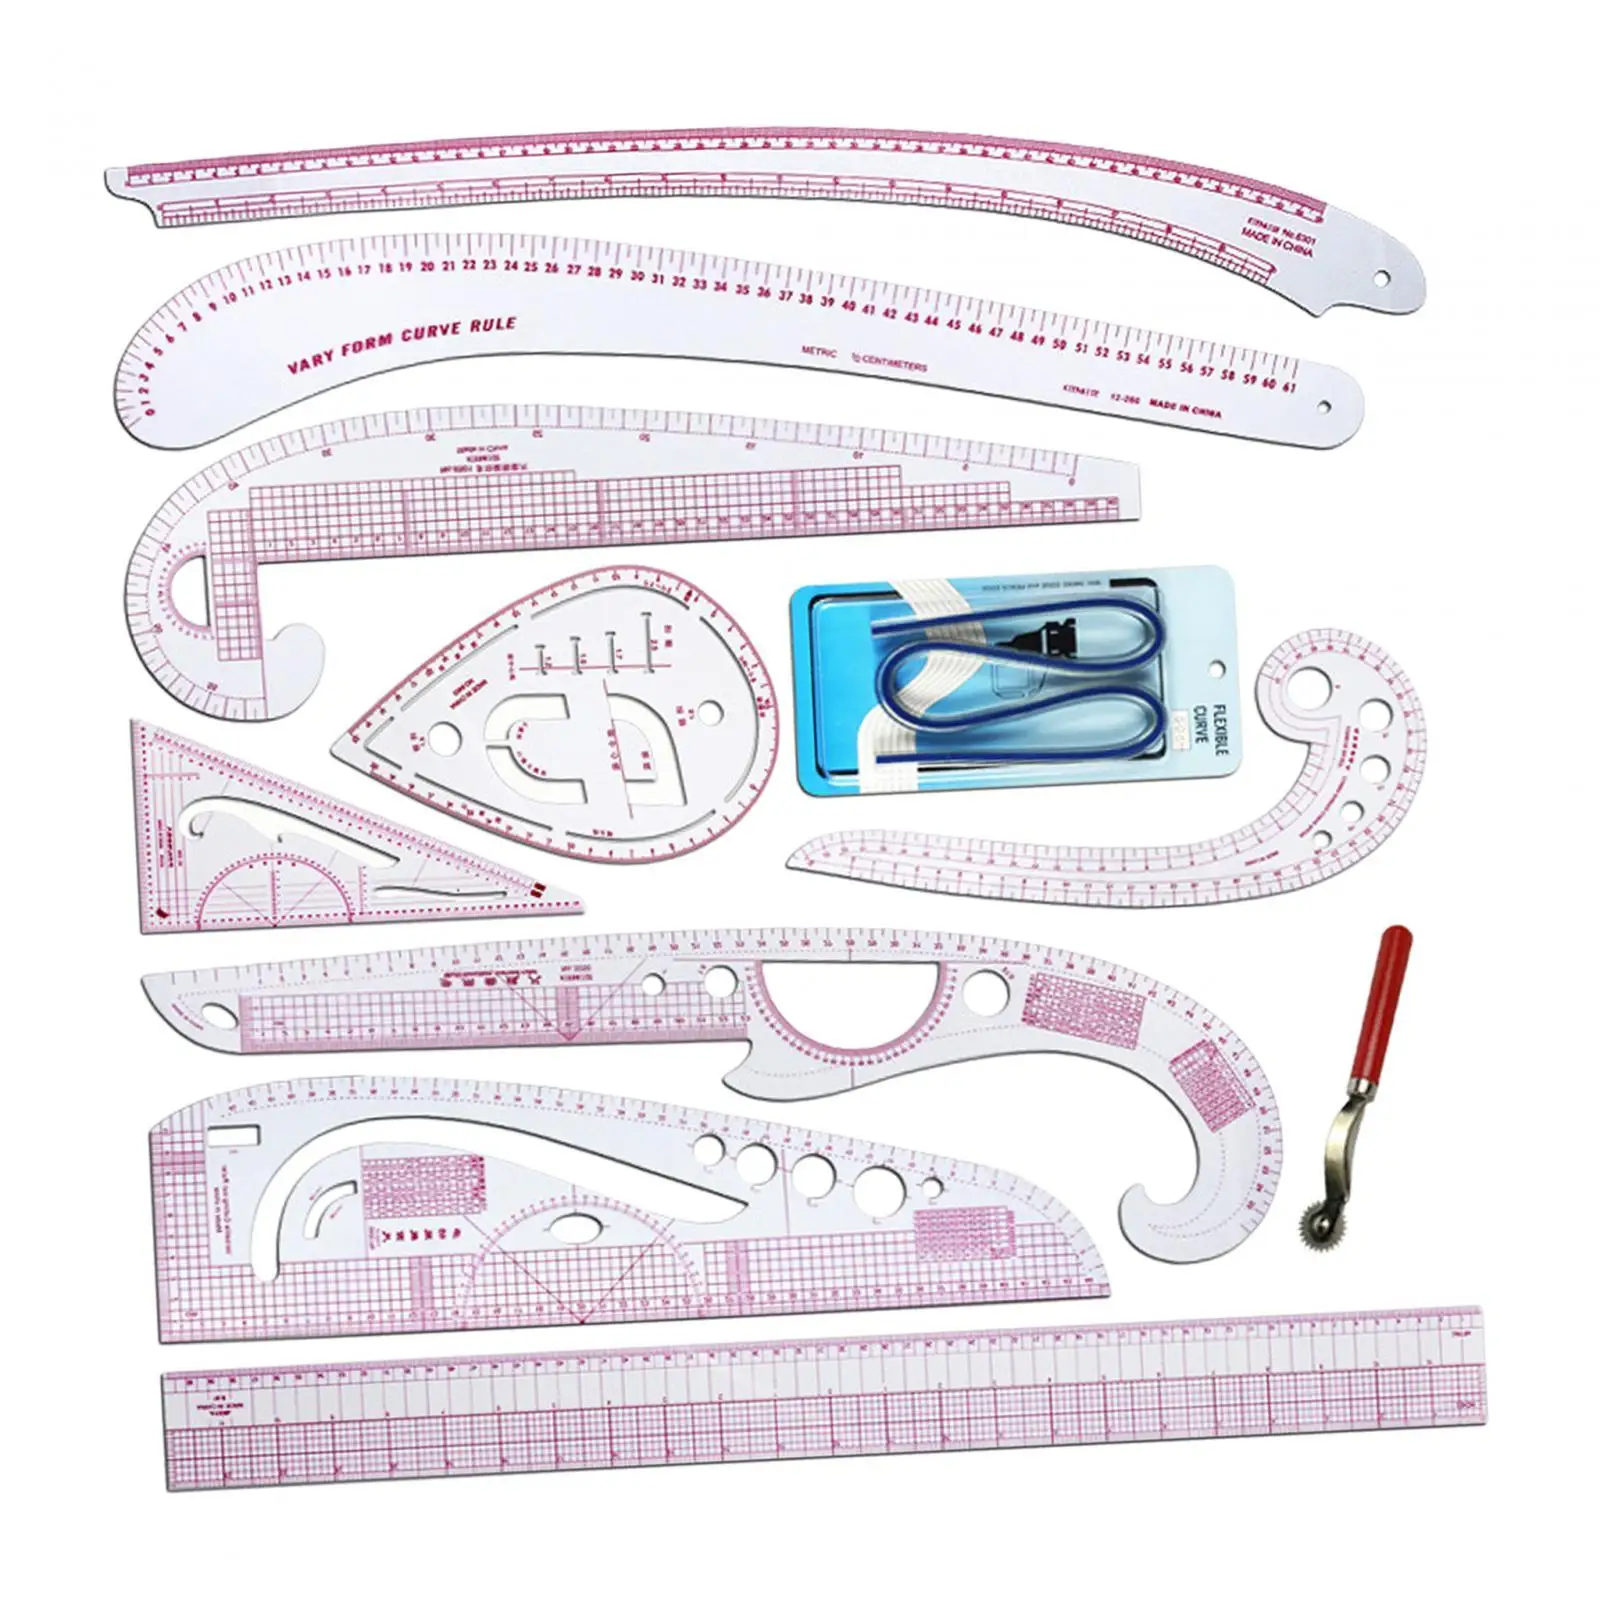 Style Sew French Curve Ruler Set Measuring Tools Bendable School Student Teaching Metric Rulers Set for Designers Sewing Tailors